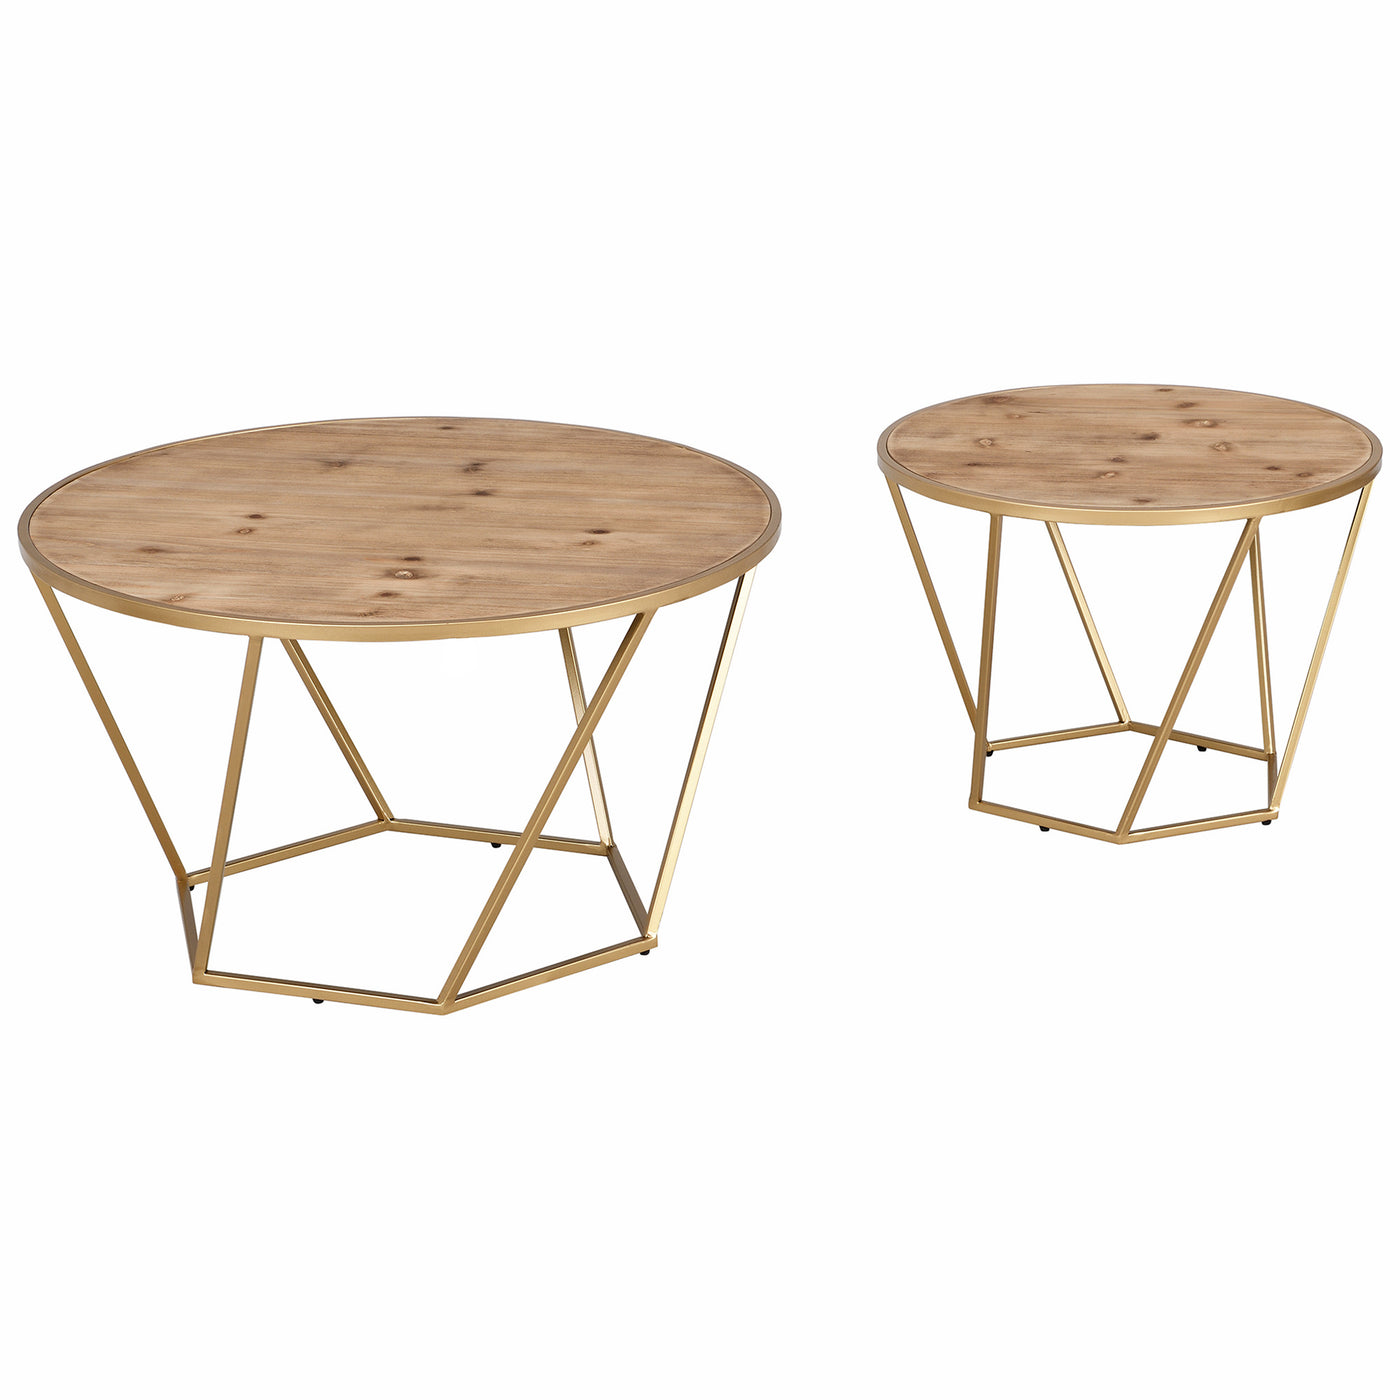 FirsTime & Co. Gold Kayla Honeycomb End Table 2-Piece Set, Glam Style, Made of Metal